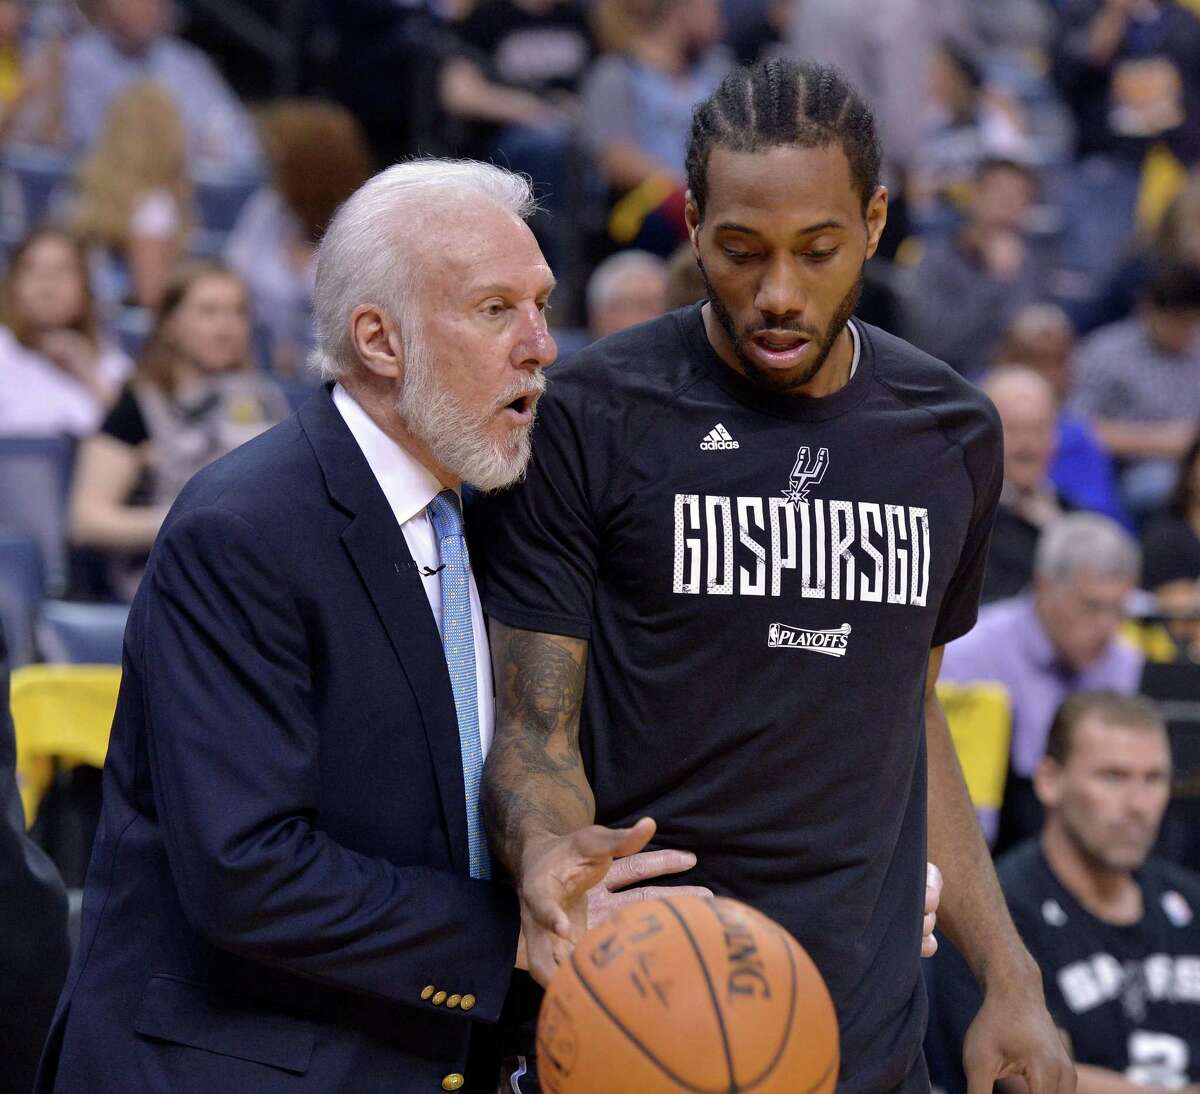 FILE - In this April 22, 2017, file photo, San Antonio Spurs head coach Gregg Popovich, left, talks with San Antonio Spurs forward Kawhi Leonard during the second half of Game 4 in an NBA basketball first-round playoff series against the Memphis Grizzlies, in Memphis, Tenn. The absolute unwillingness to answer certain questions is part of the San Antonio Spurs' mystique. The Spurs just don't share much. So there is some unmistakable irony here that when it comes to the obviously fractured relationship between San Antonio and Kawhi Leonard, it's the Spurs who are the ones frustrated by the lack of answers.(AP Photo/Brandon Dill, File)